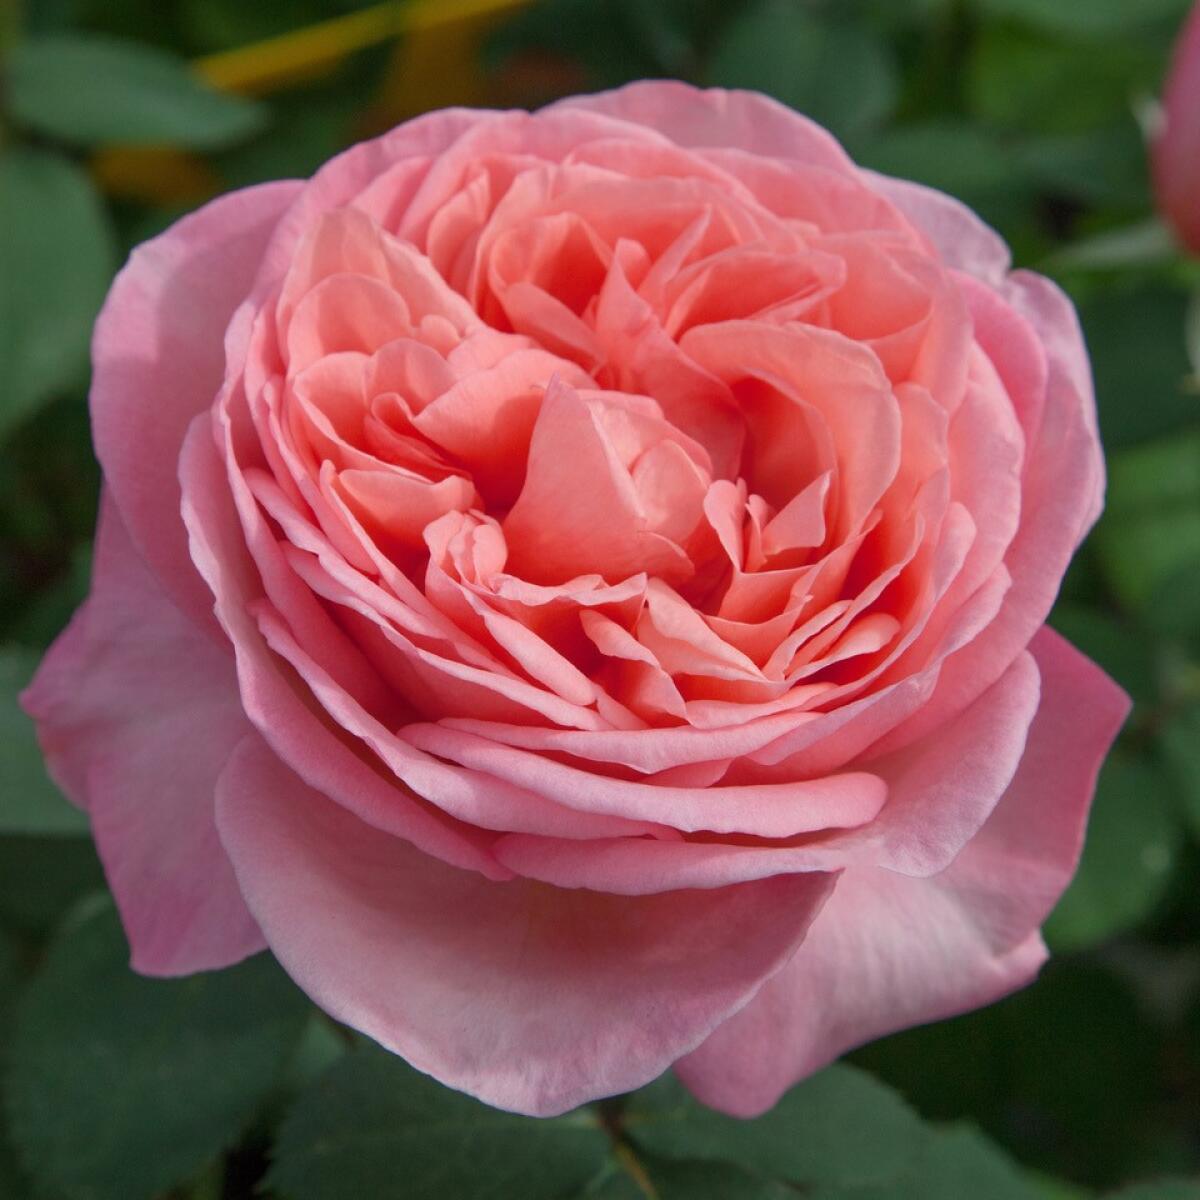 ‘Sweet Mademoiselle’ is a 2018 Meilland hybrid tea rose with large, 5-inch pink-peach blooms.